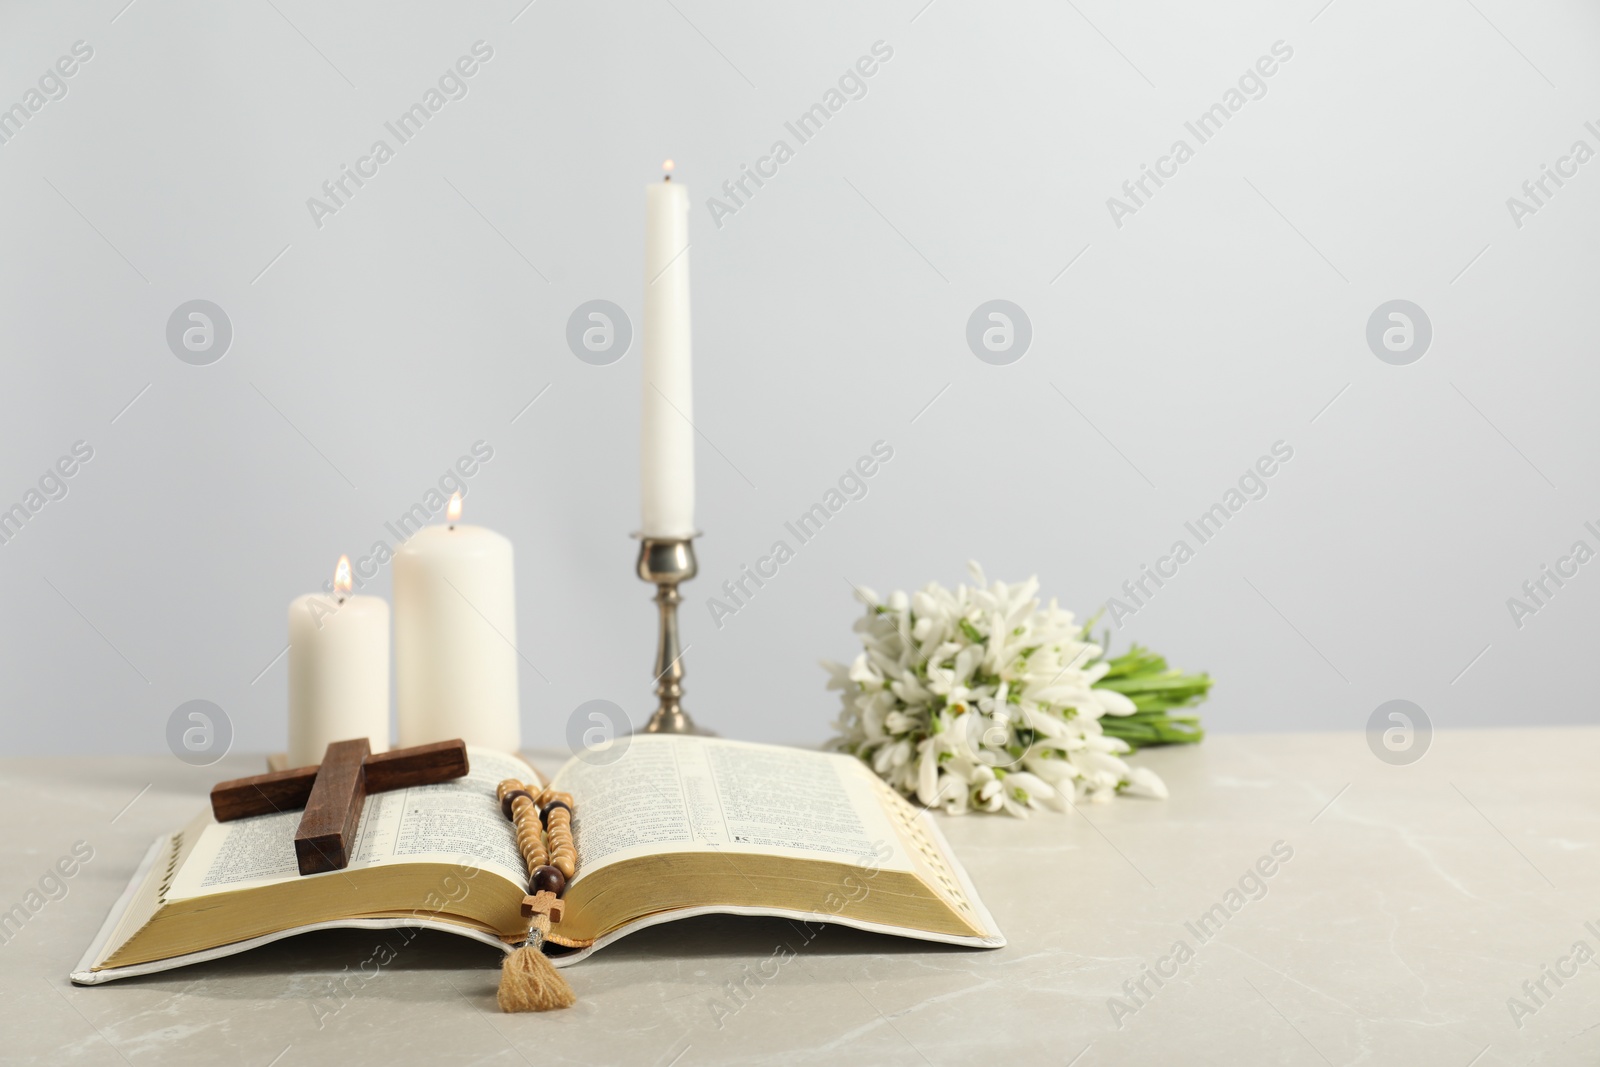 Photo of Church candles, wooden cross, rosary beads, Bible and flowers on light table. Space for text